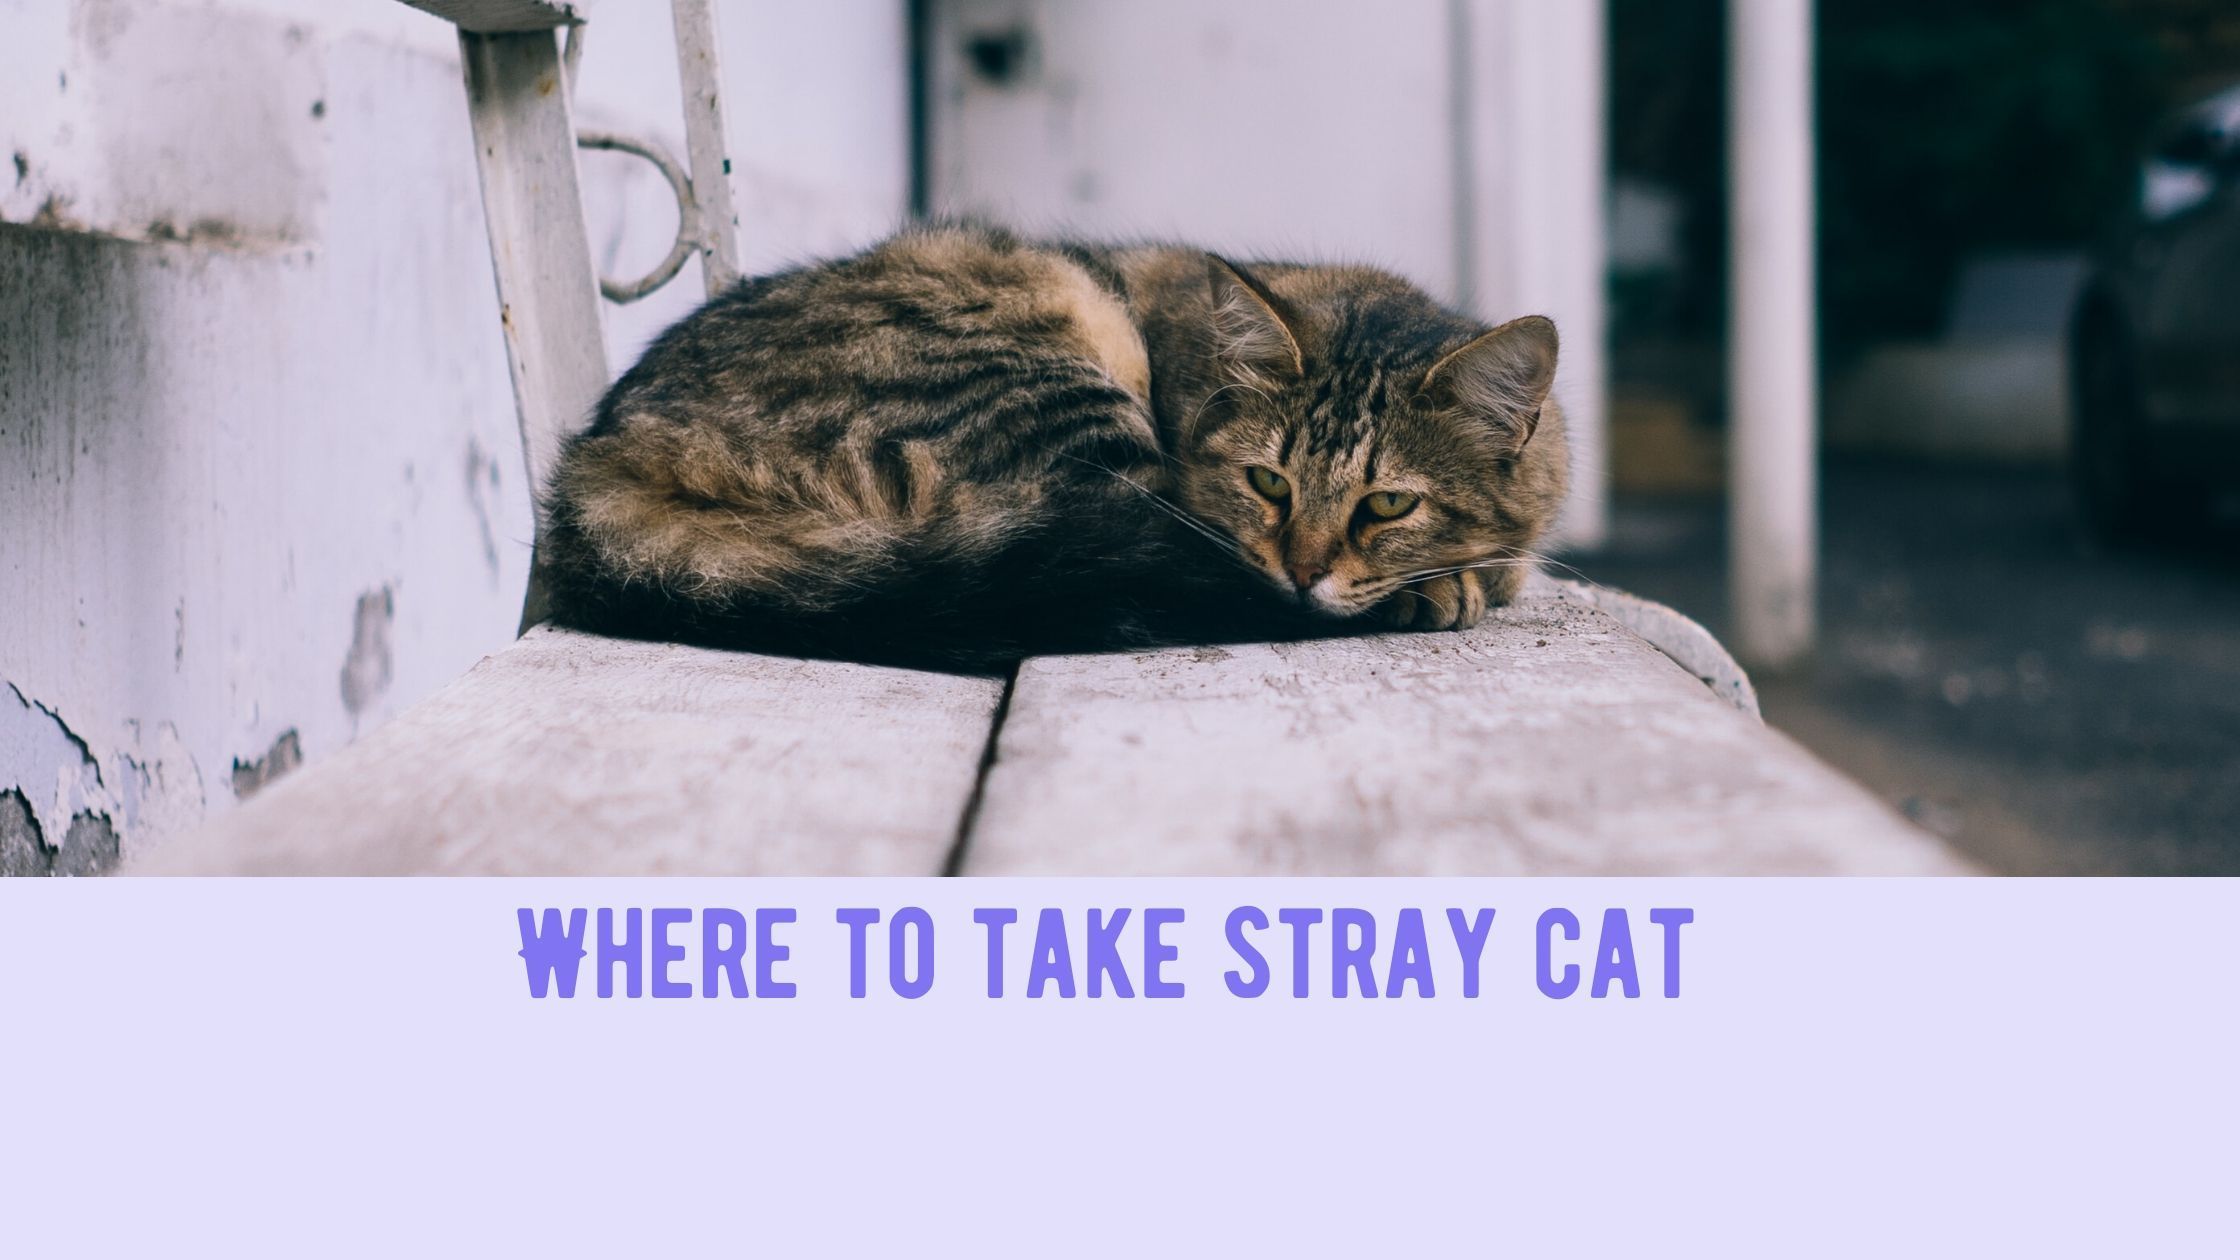 Where Can i Take a Stray Cat ᐉ US Organizations to Take a Stray Cat